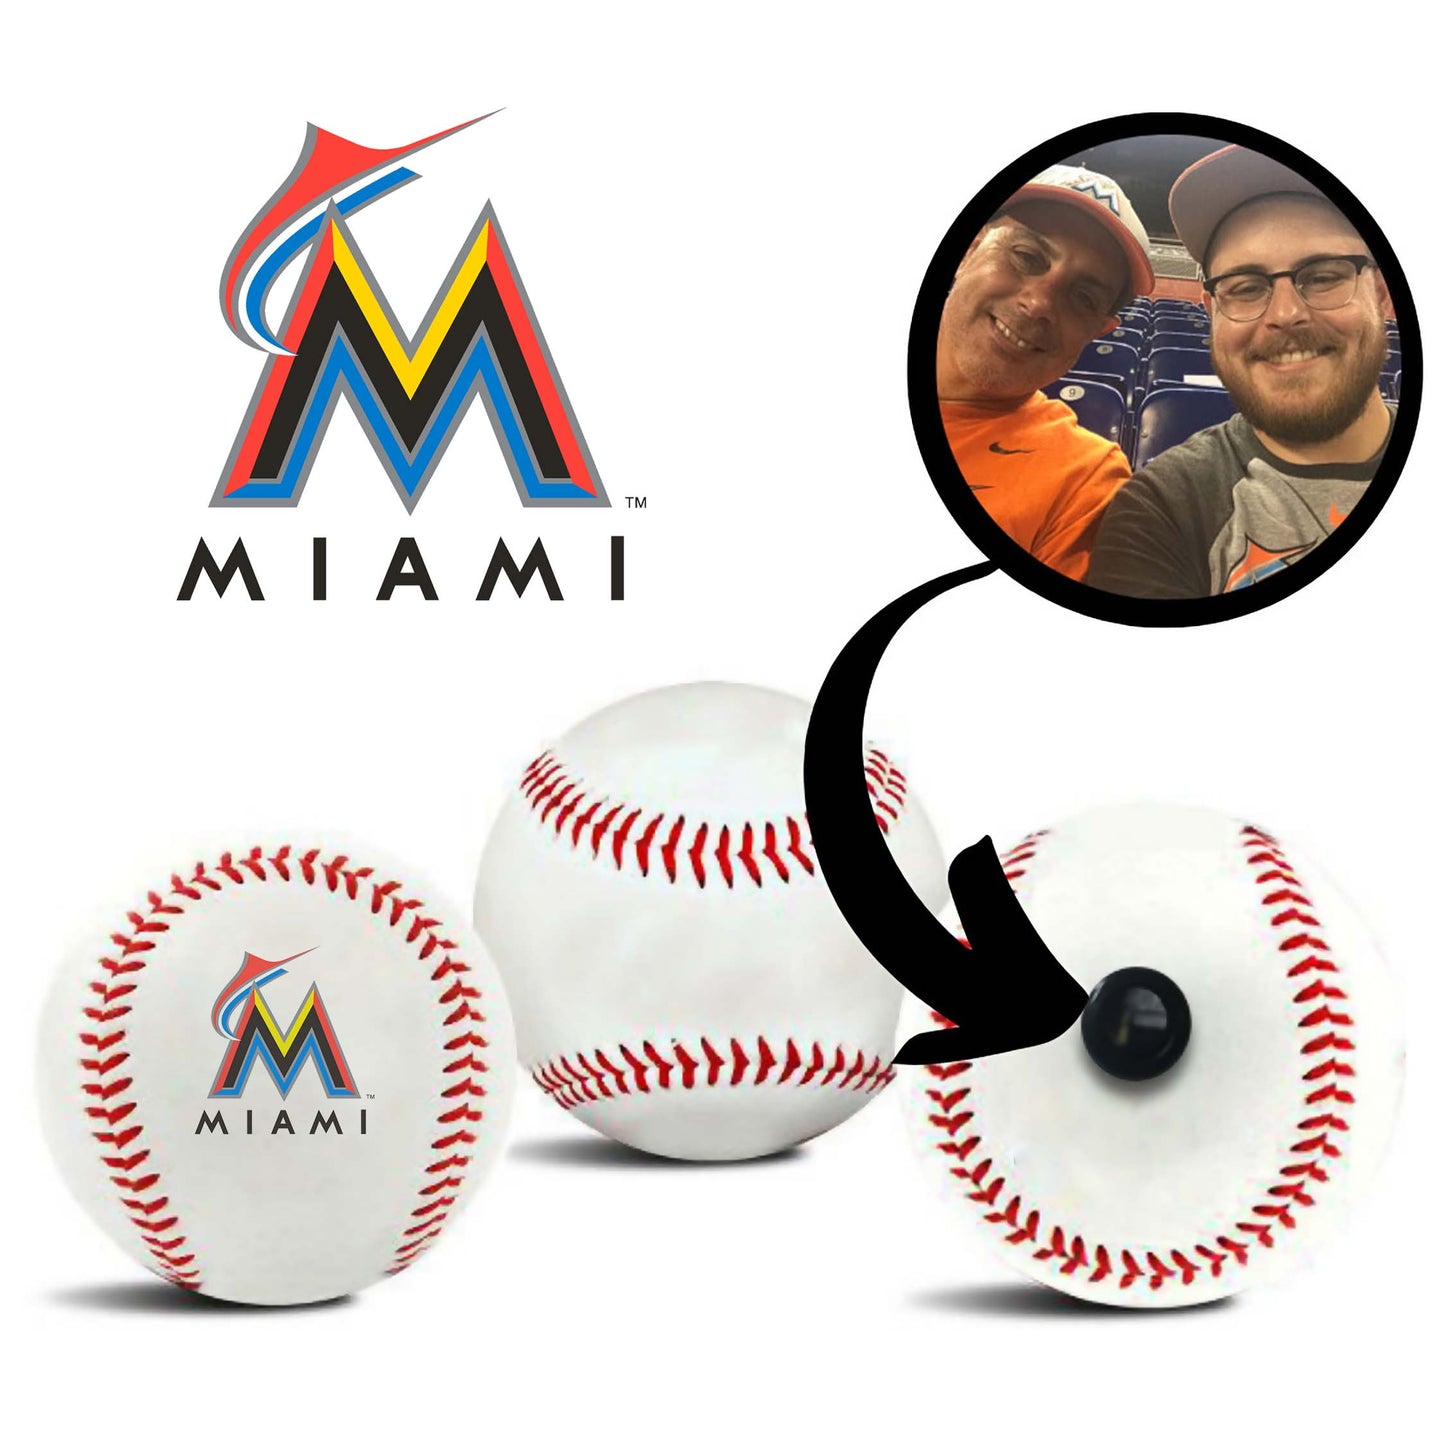 Miami Marlins MLB Collectible Baseball - Picture Inside - FANZ Collectibles